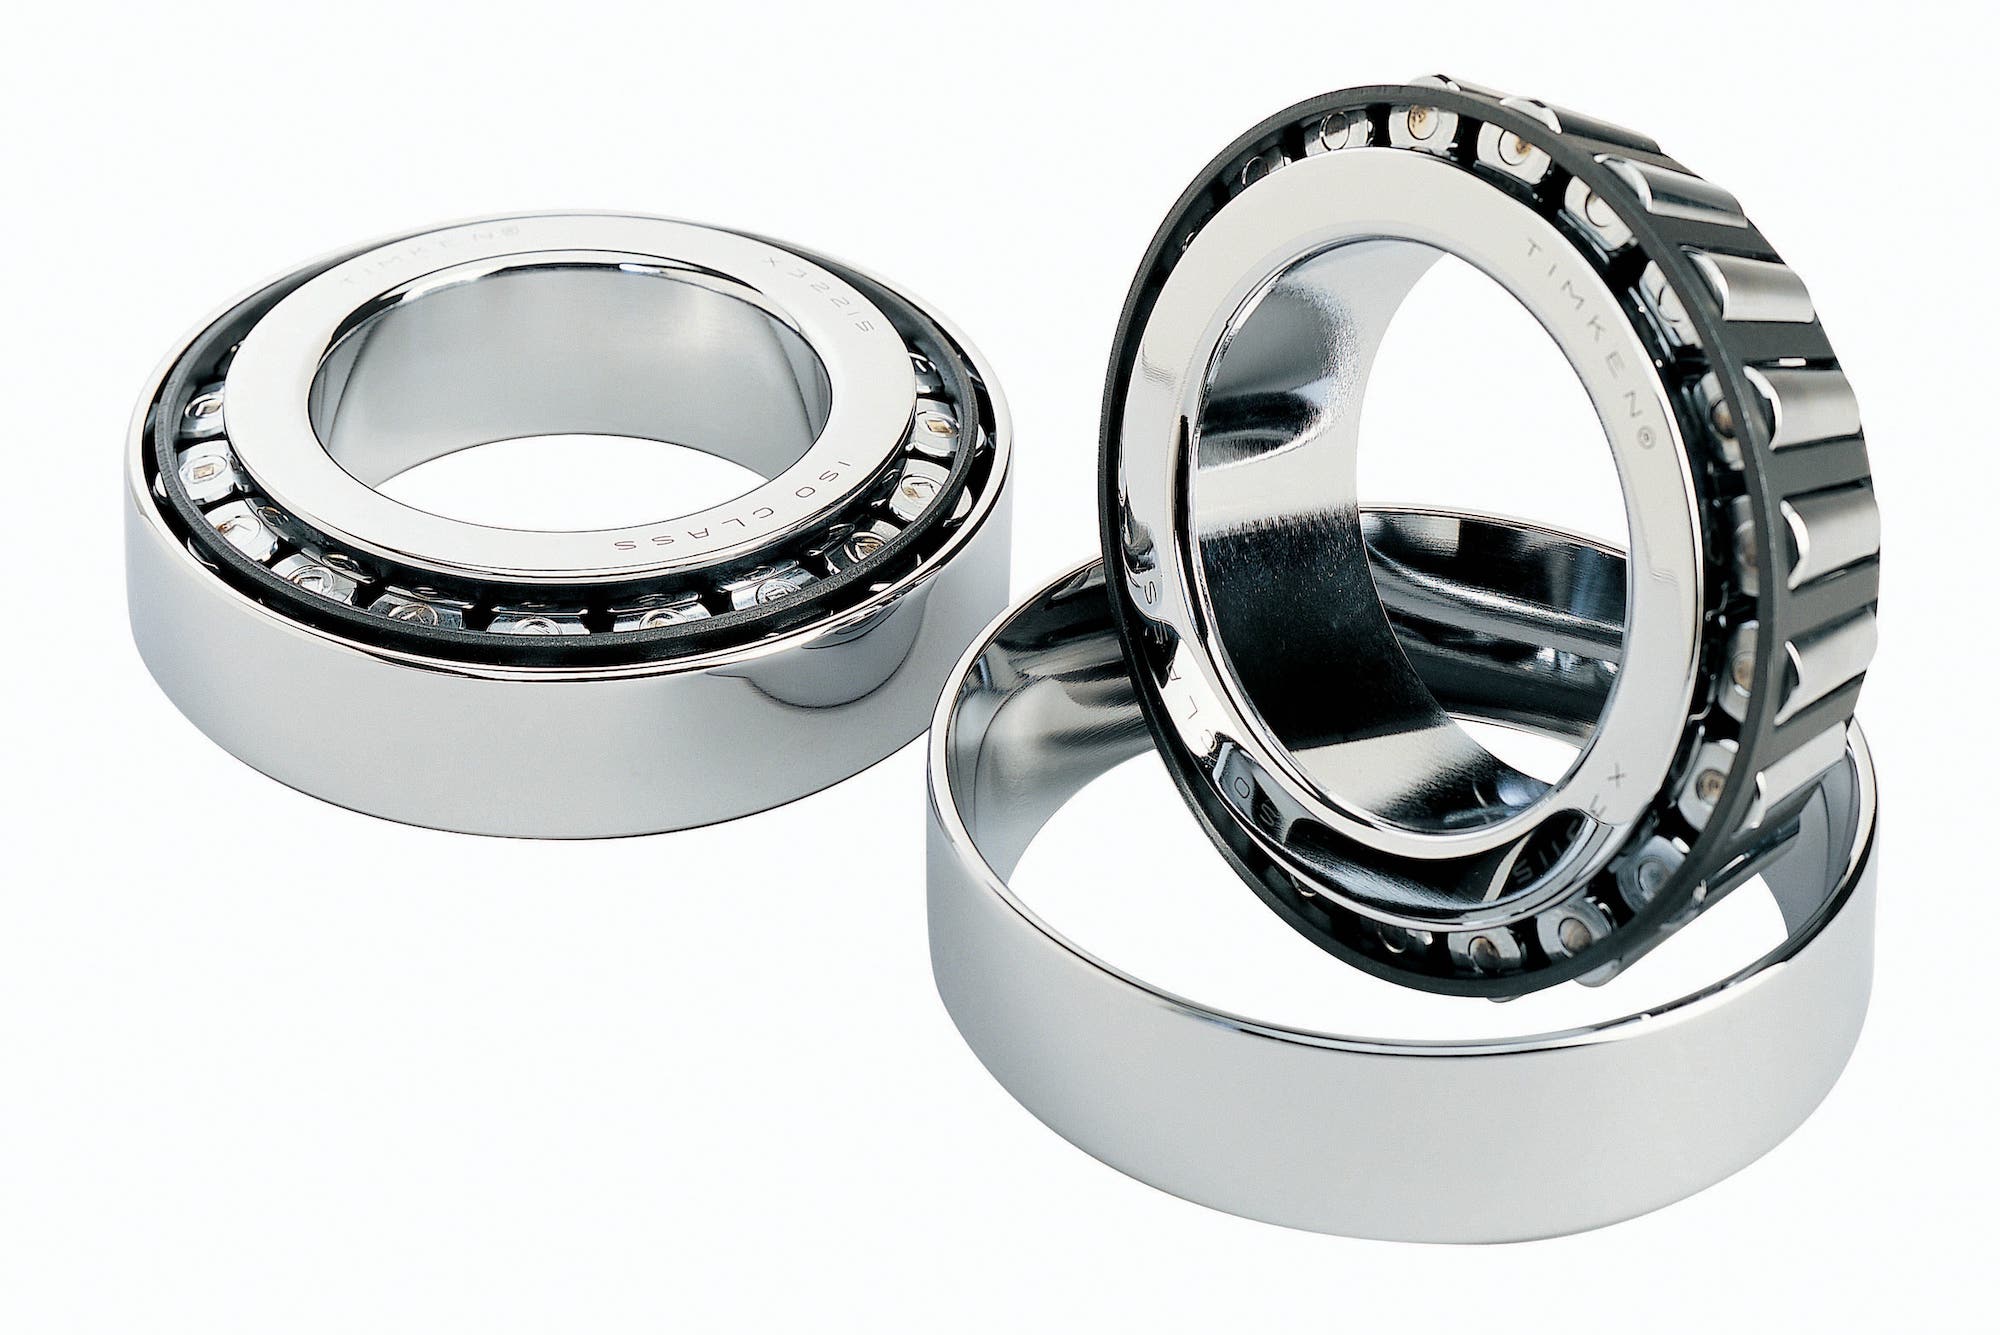 What Are Tapered Roller Bearings? - Bearing Tips